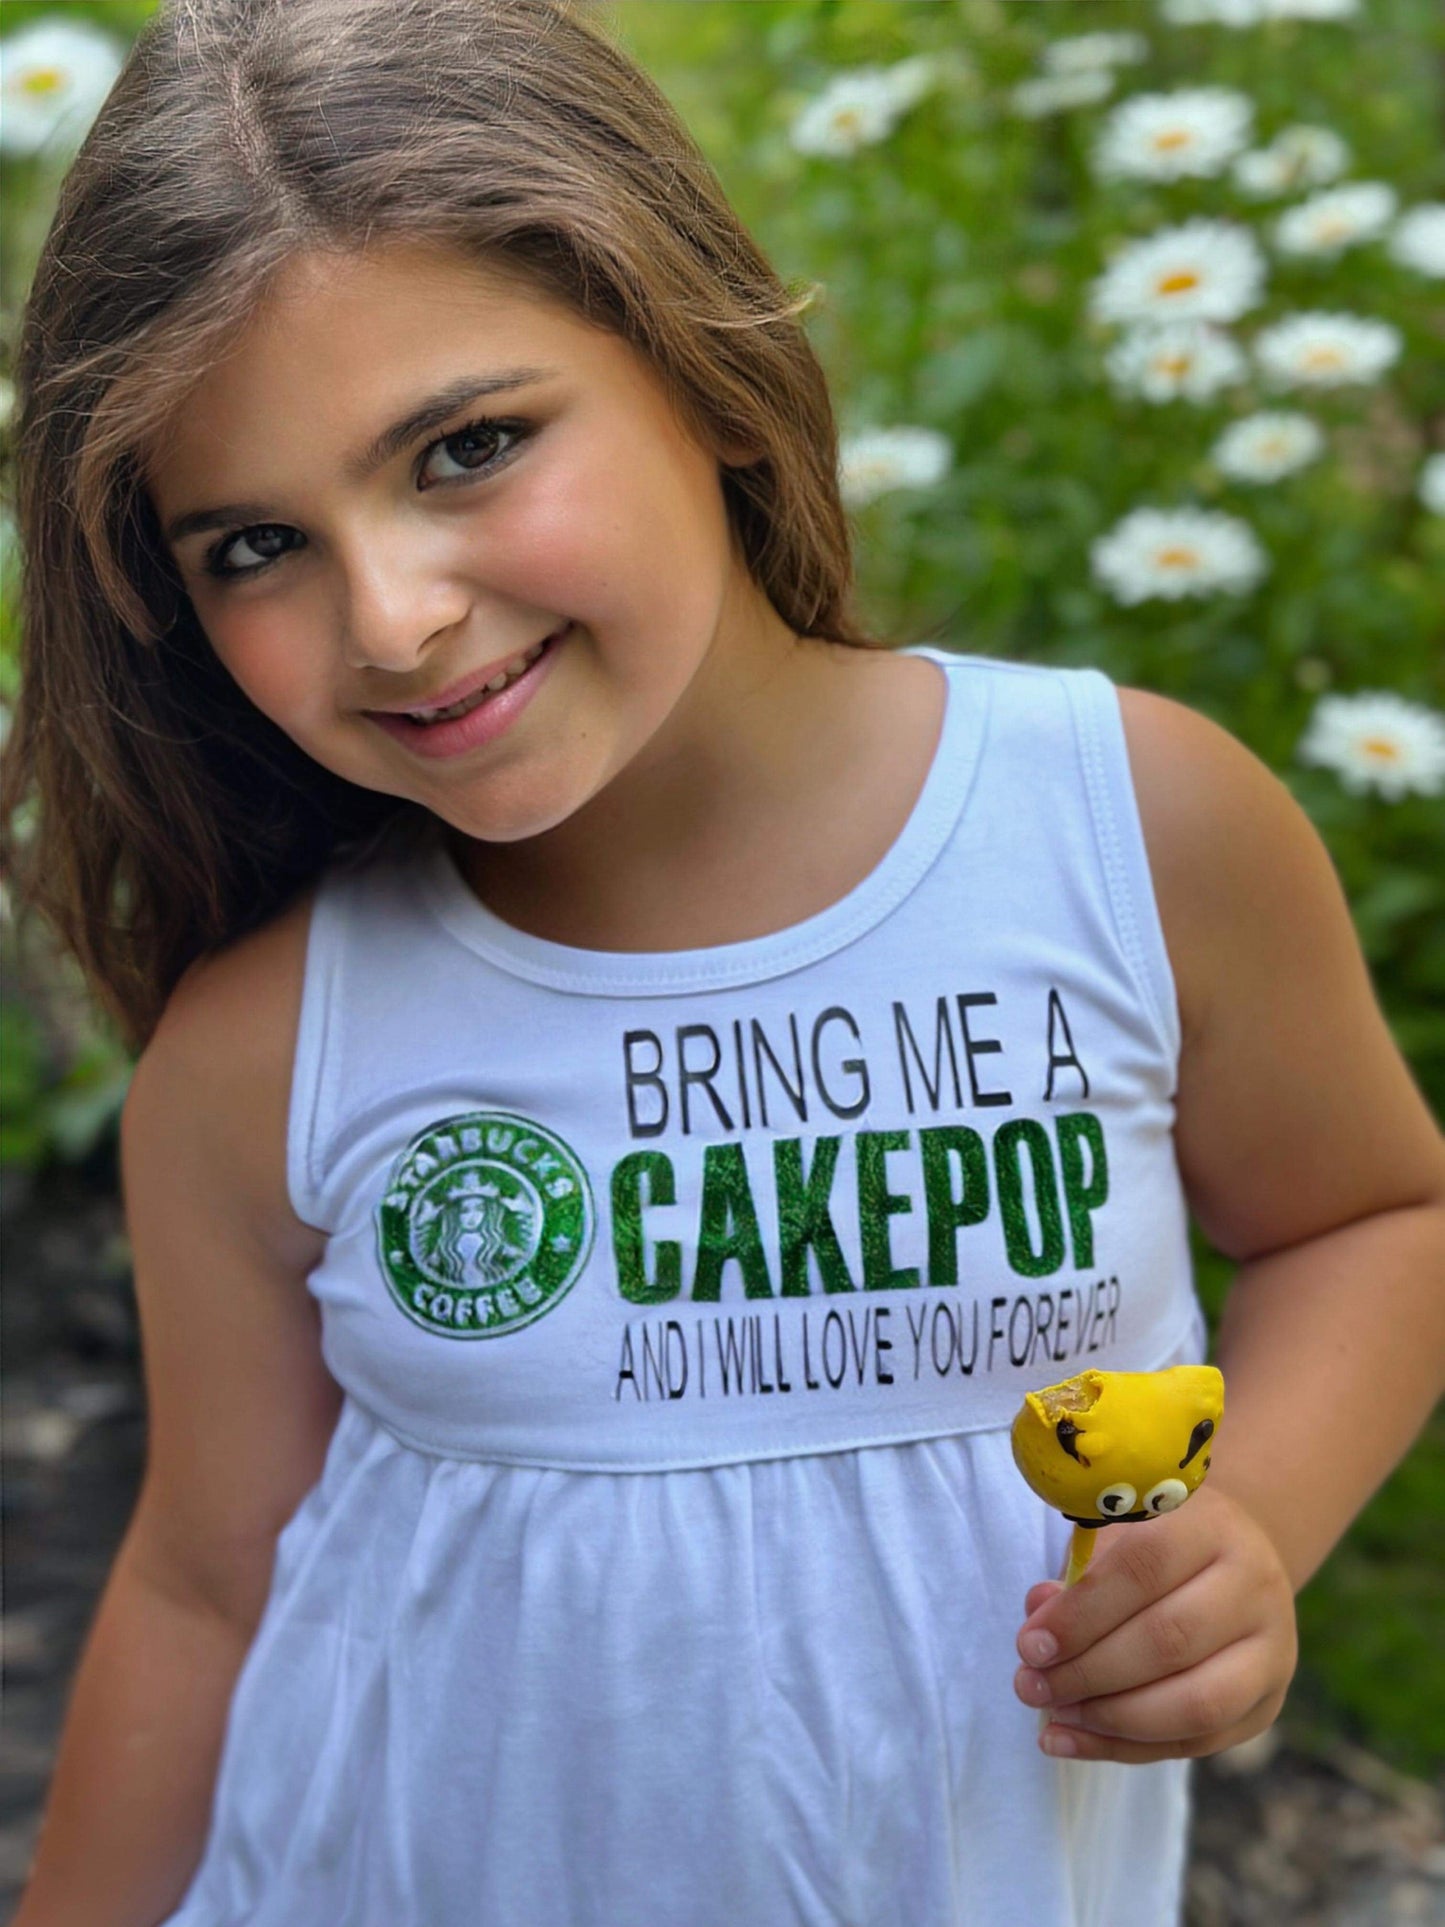 Bring Me a Cakepop and I will Love You Forever Shirt